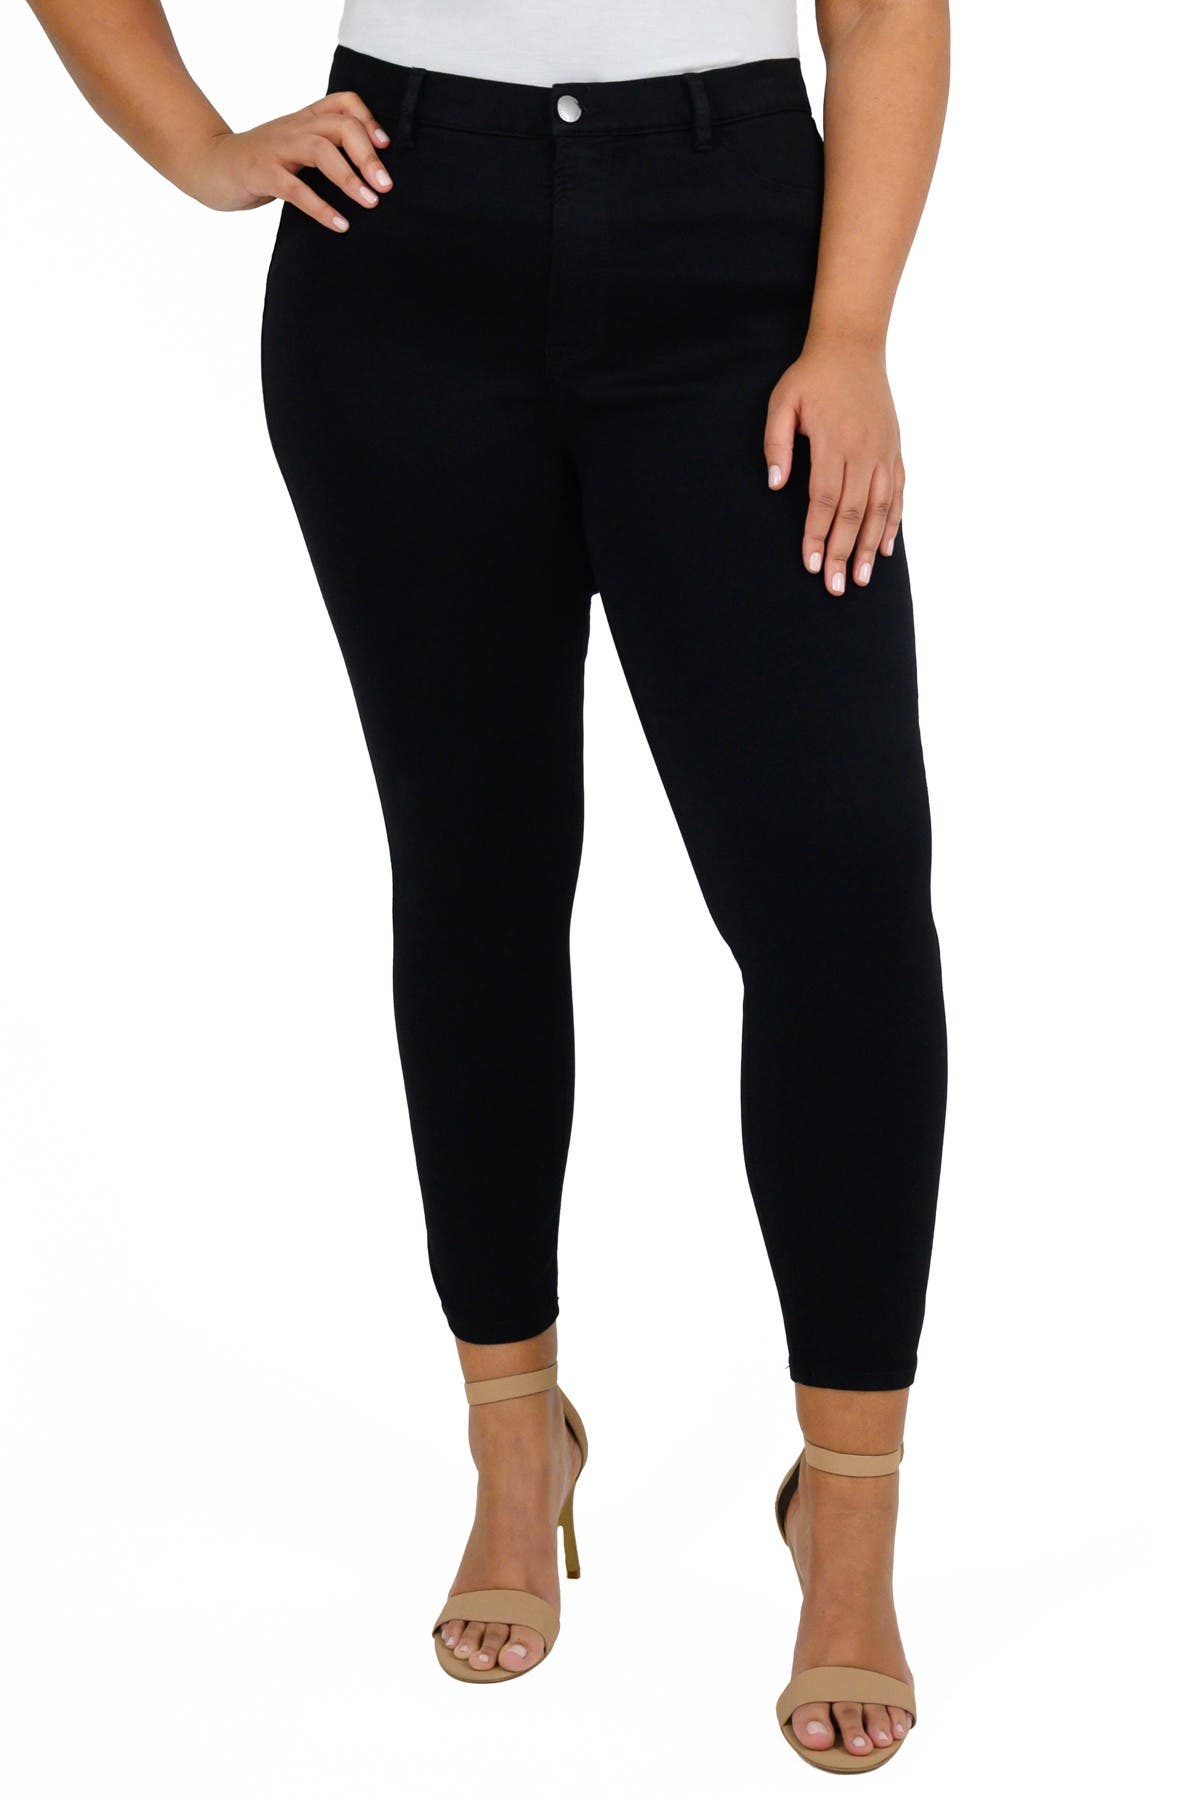 curve appeal jeans essential skinny